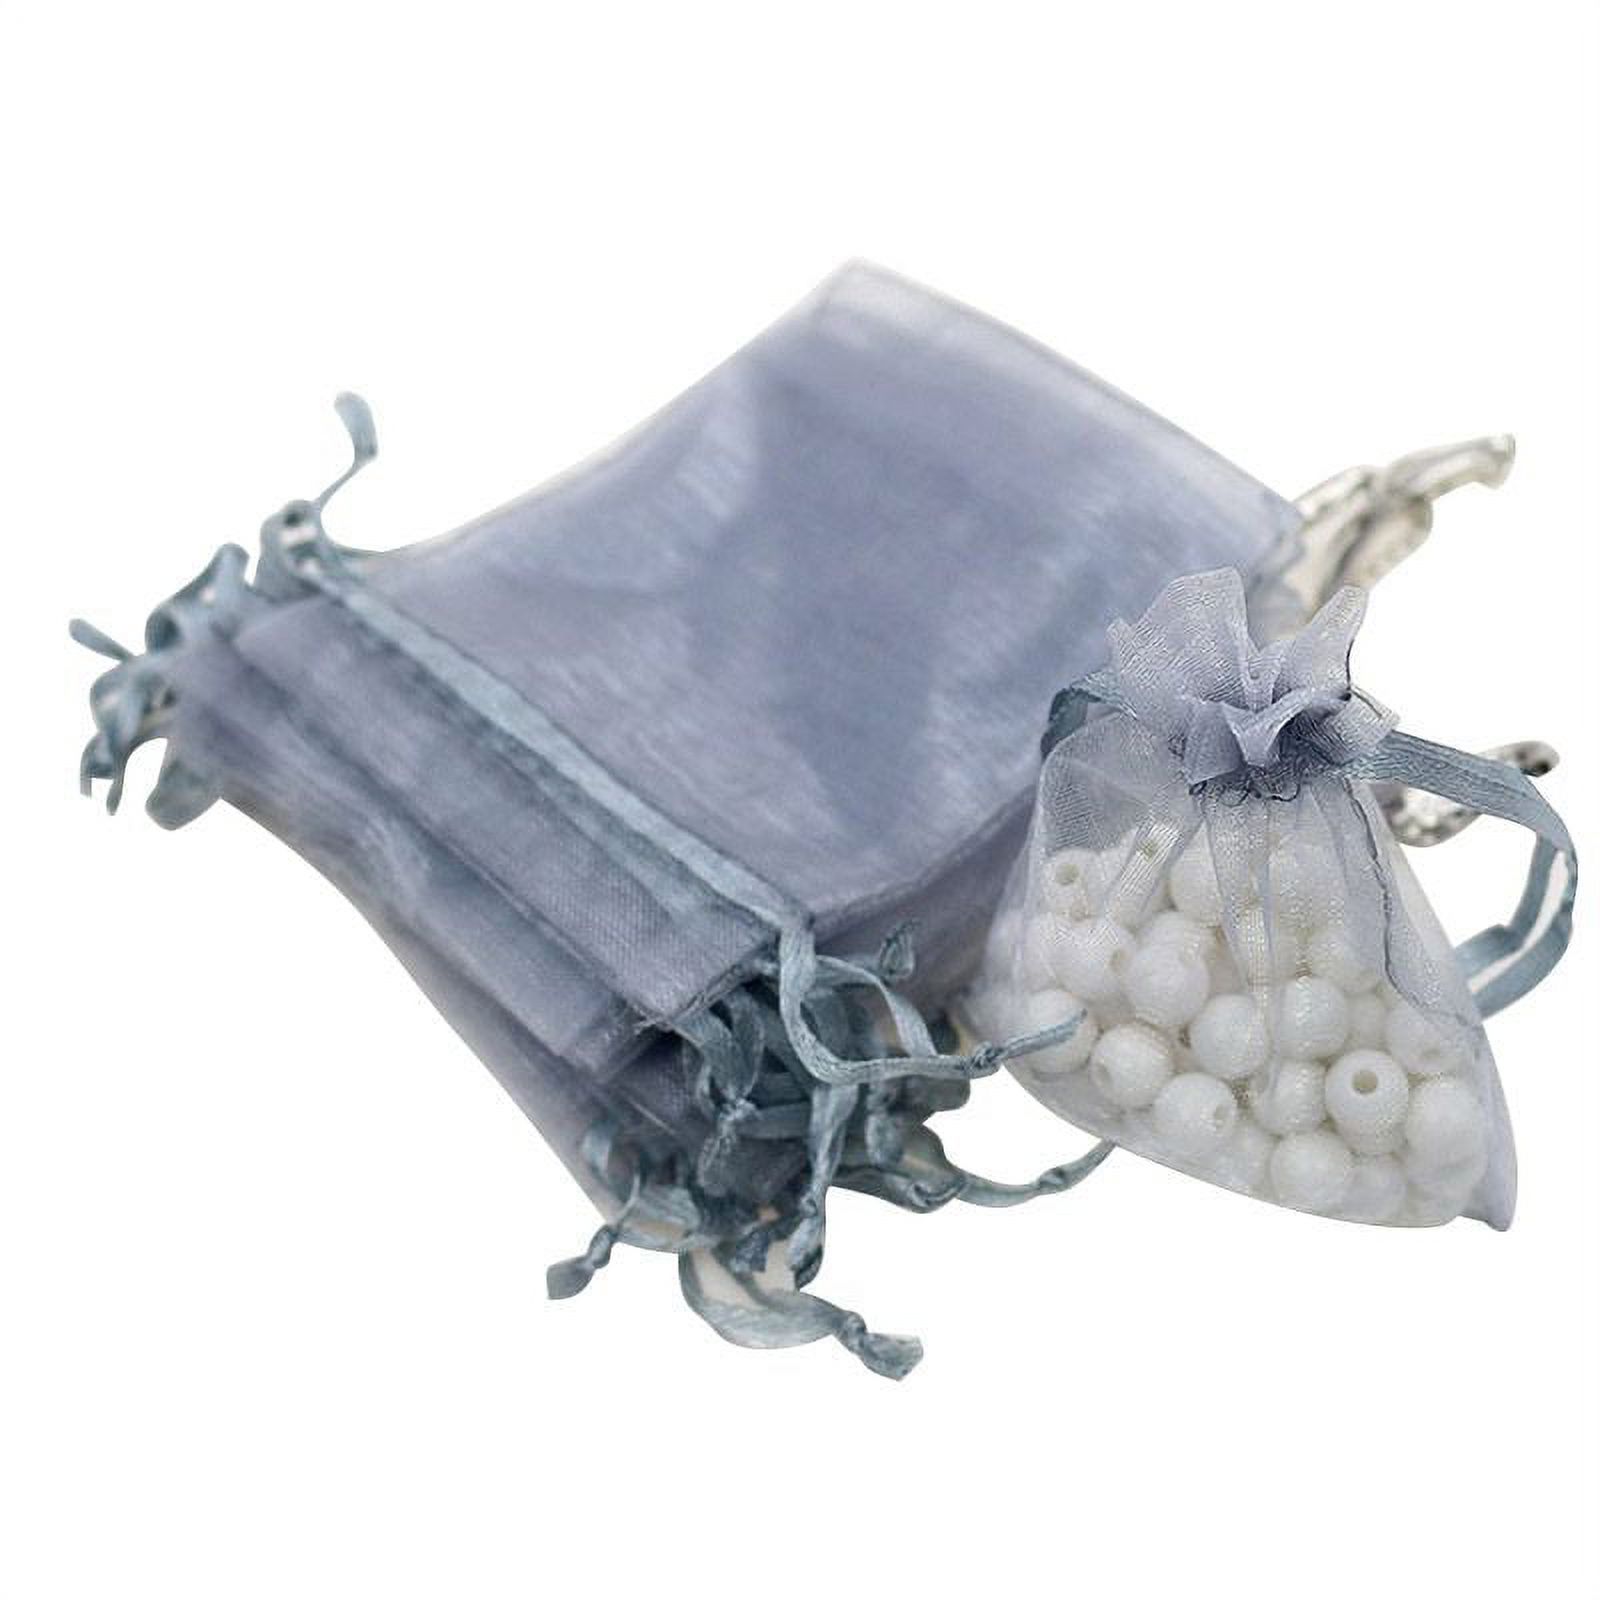 SUPERHOMUSE 100PCS Sheer Drawstring Organza Bags Jewelry Pouche Wedding Party Favor Gift Bag - image 4 of 8